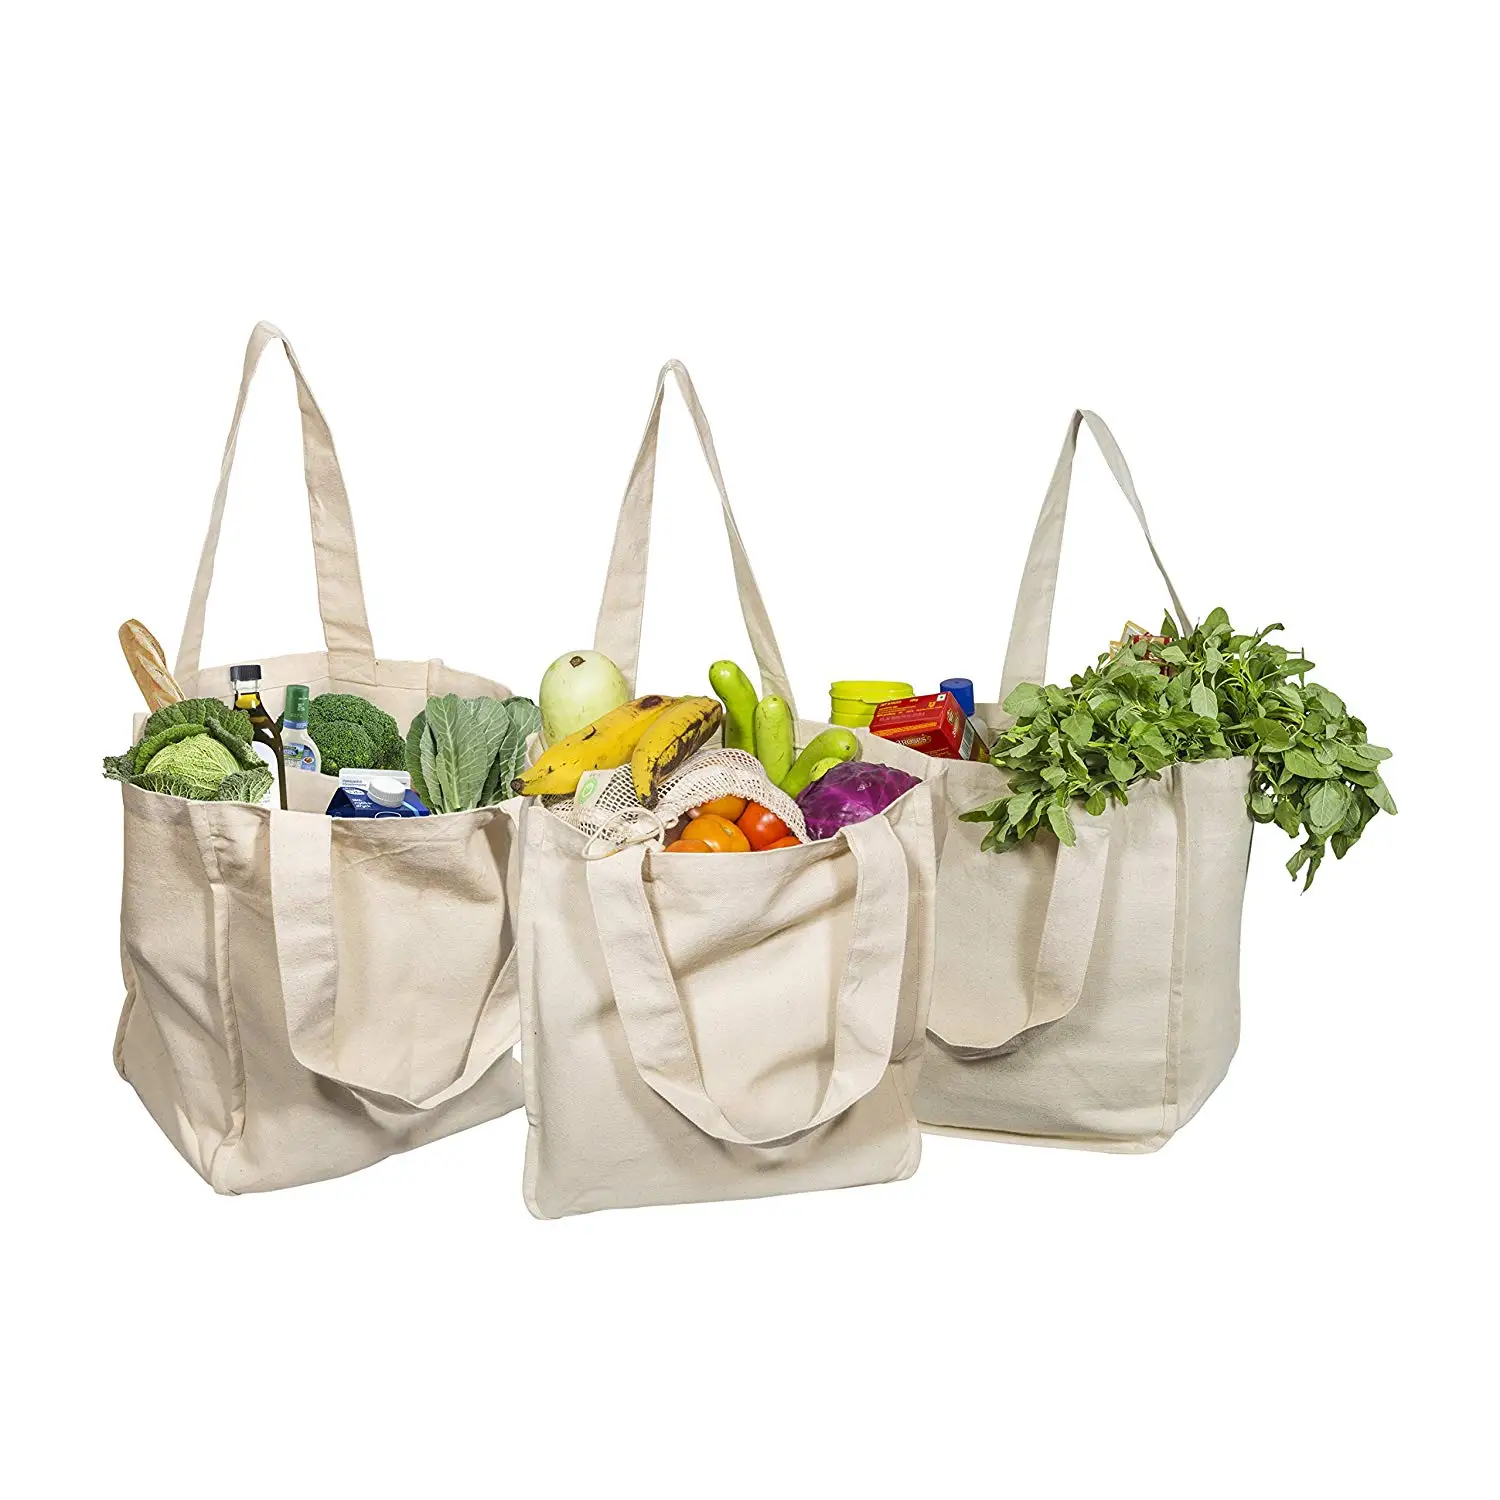 Canvas Bag Reusable Shopping Bags Grocery Tote Bag Cotton Daily Use  Handbags Women Casual Handbag - Buy Mini Tote Bags,Mini Tote Bags  Wholesale,Promotional Mini Tote Bag Product on Alibaba.com